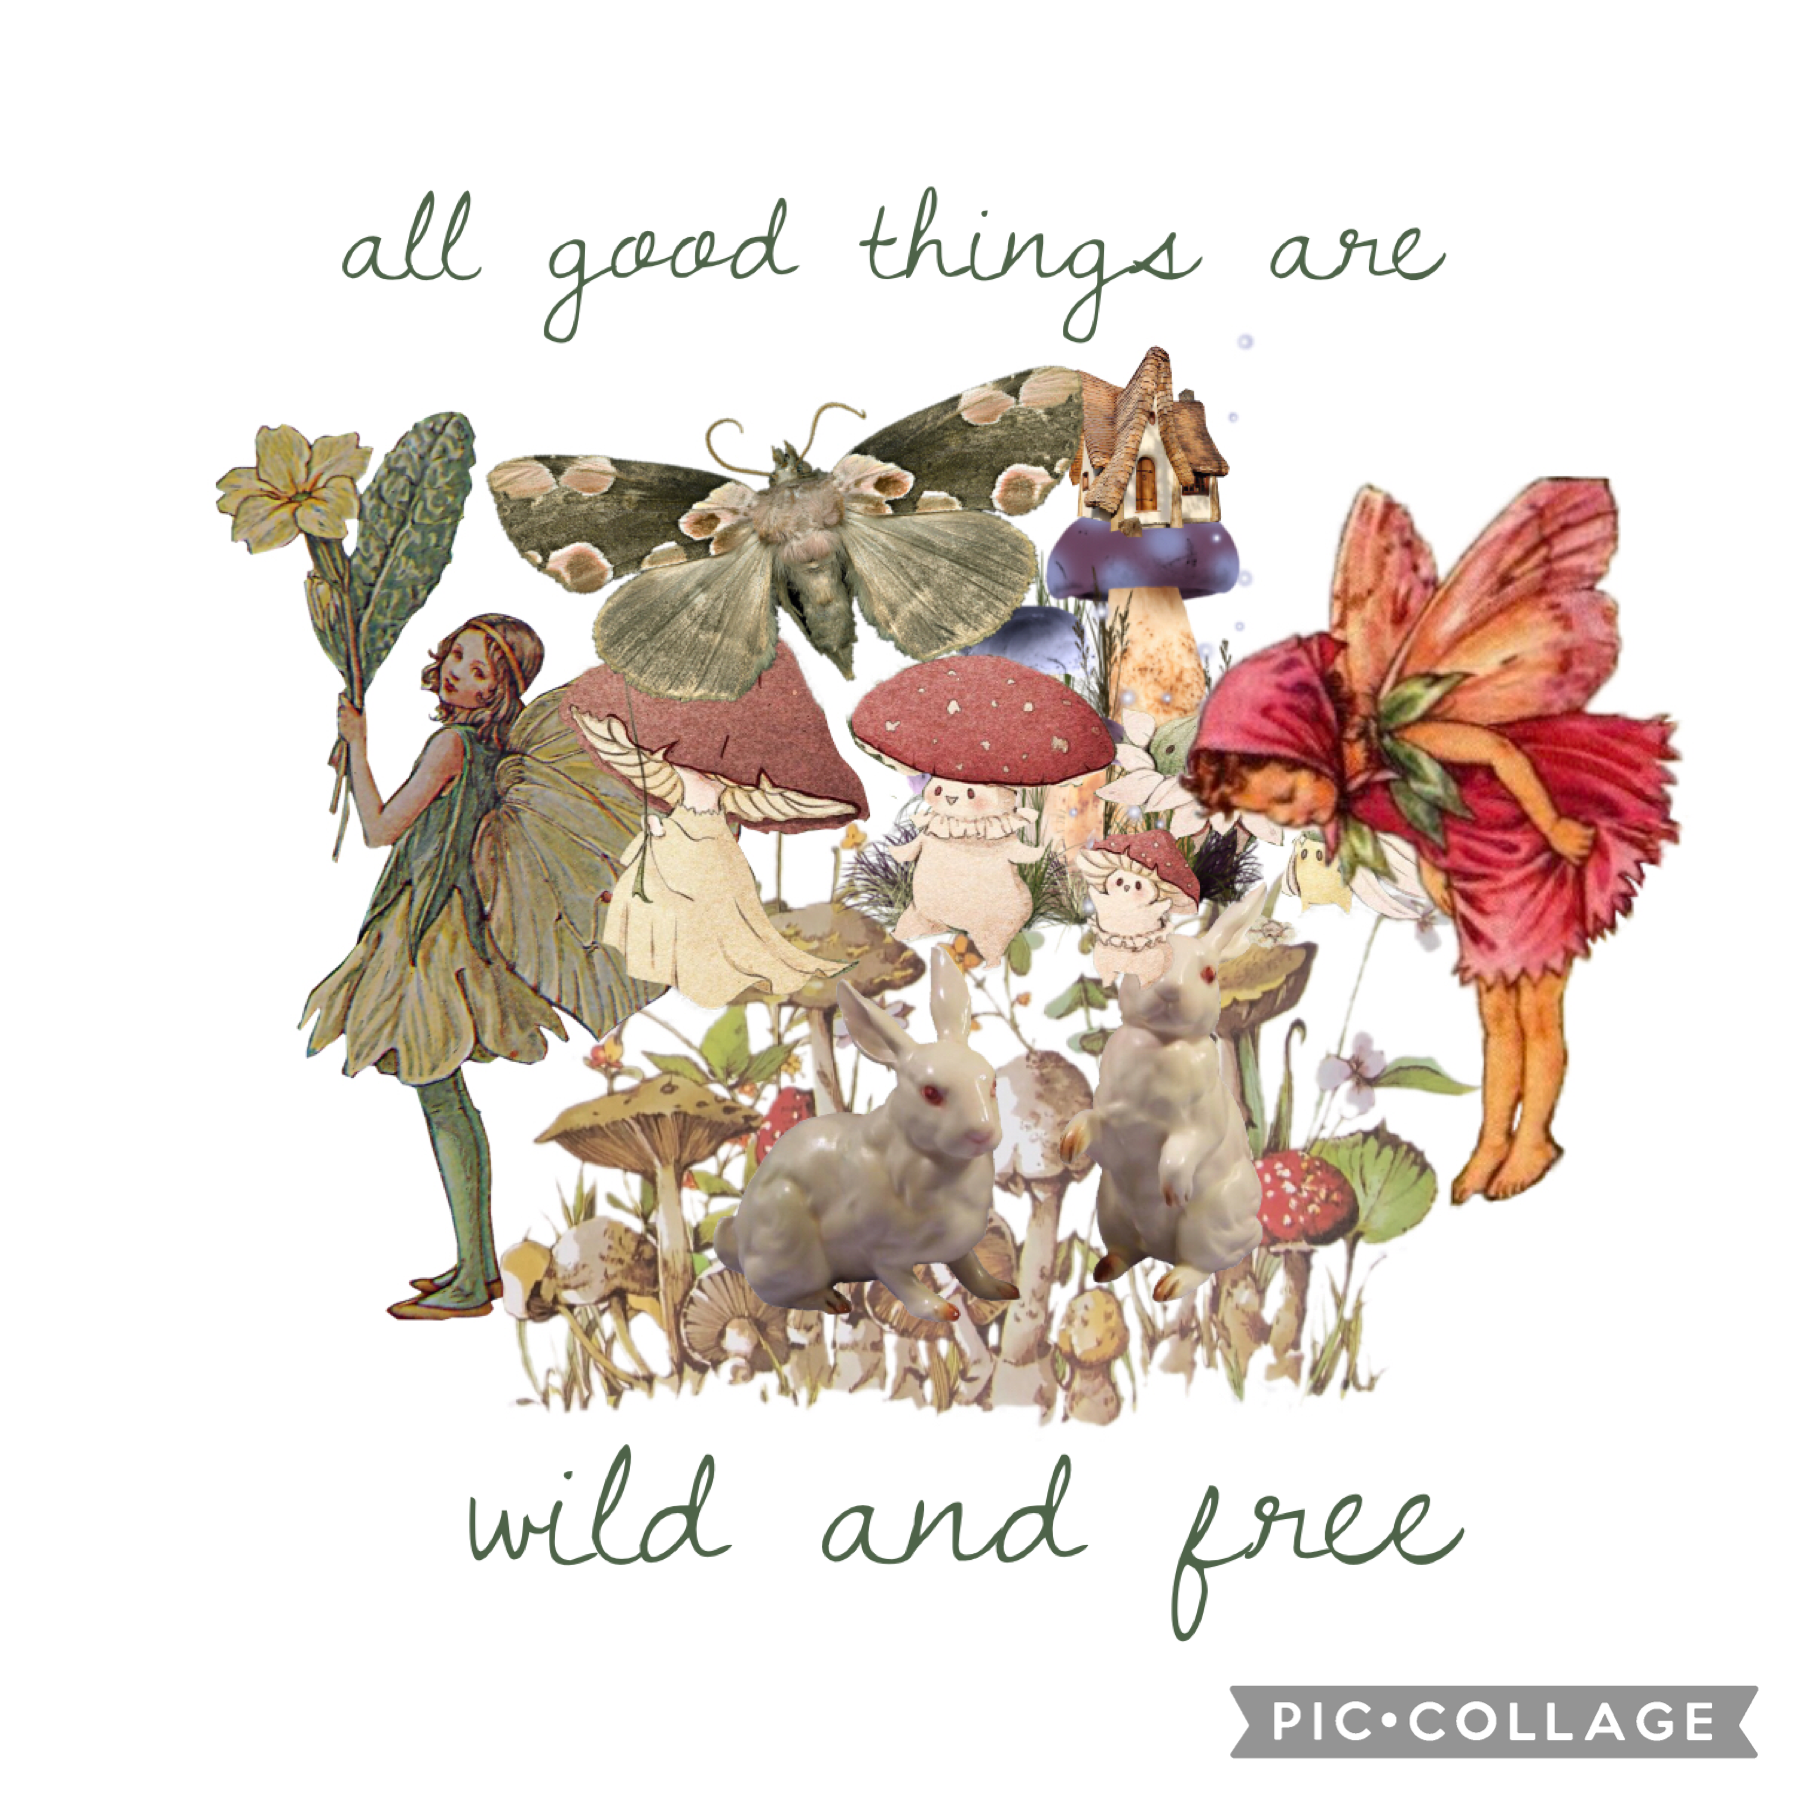 🍄 7/26/22 🍄
cottage aesthetic and my first collage! what do you think about it?